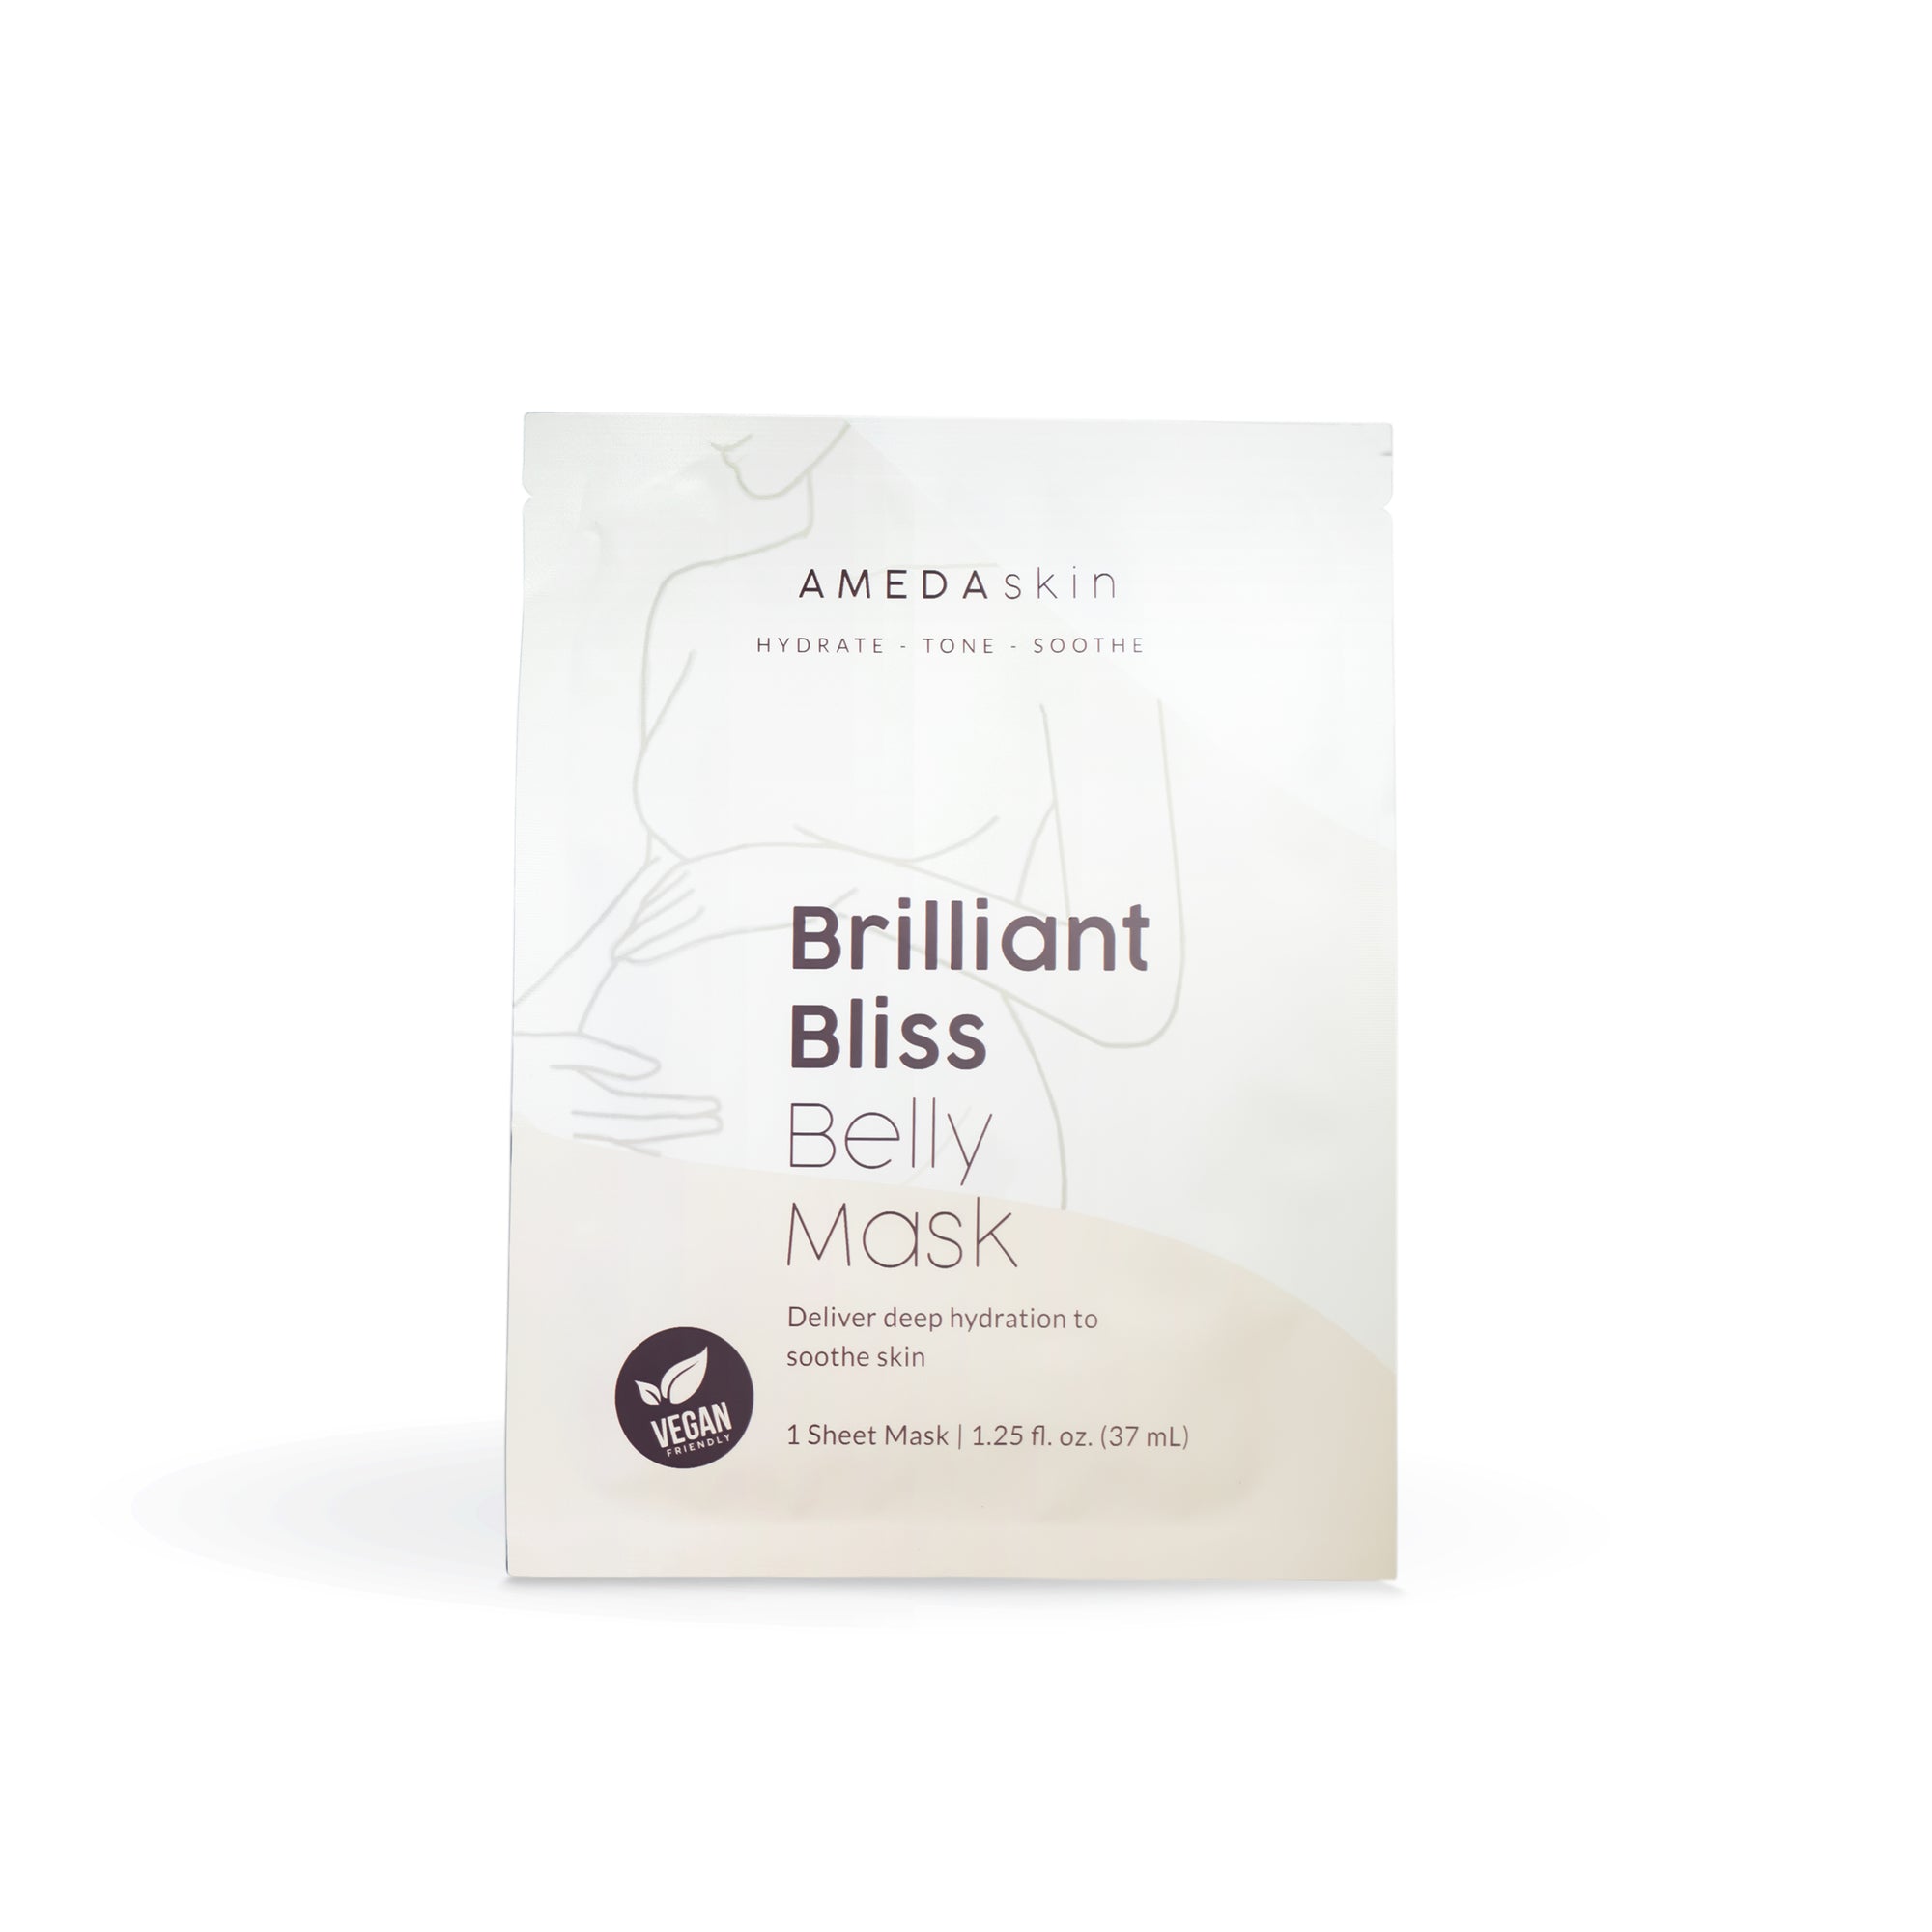 Brilliant Bliss Belly Mask